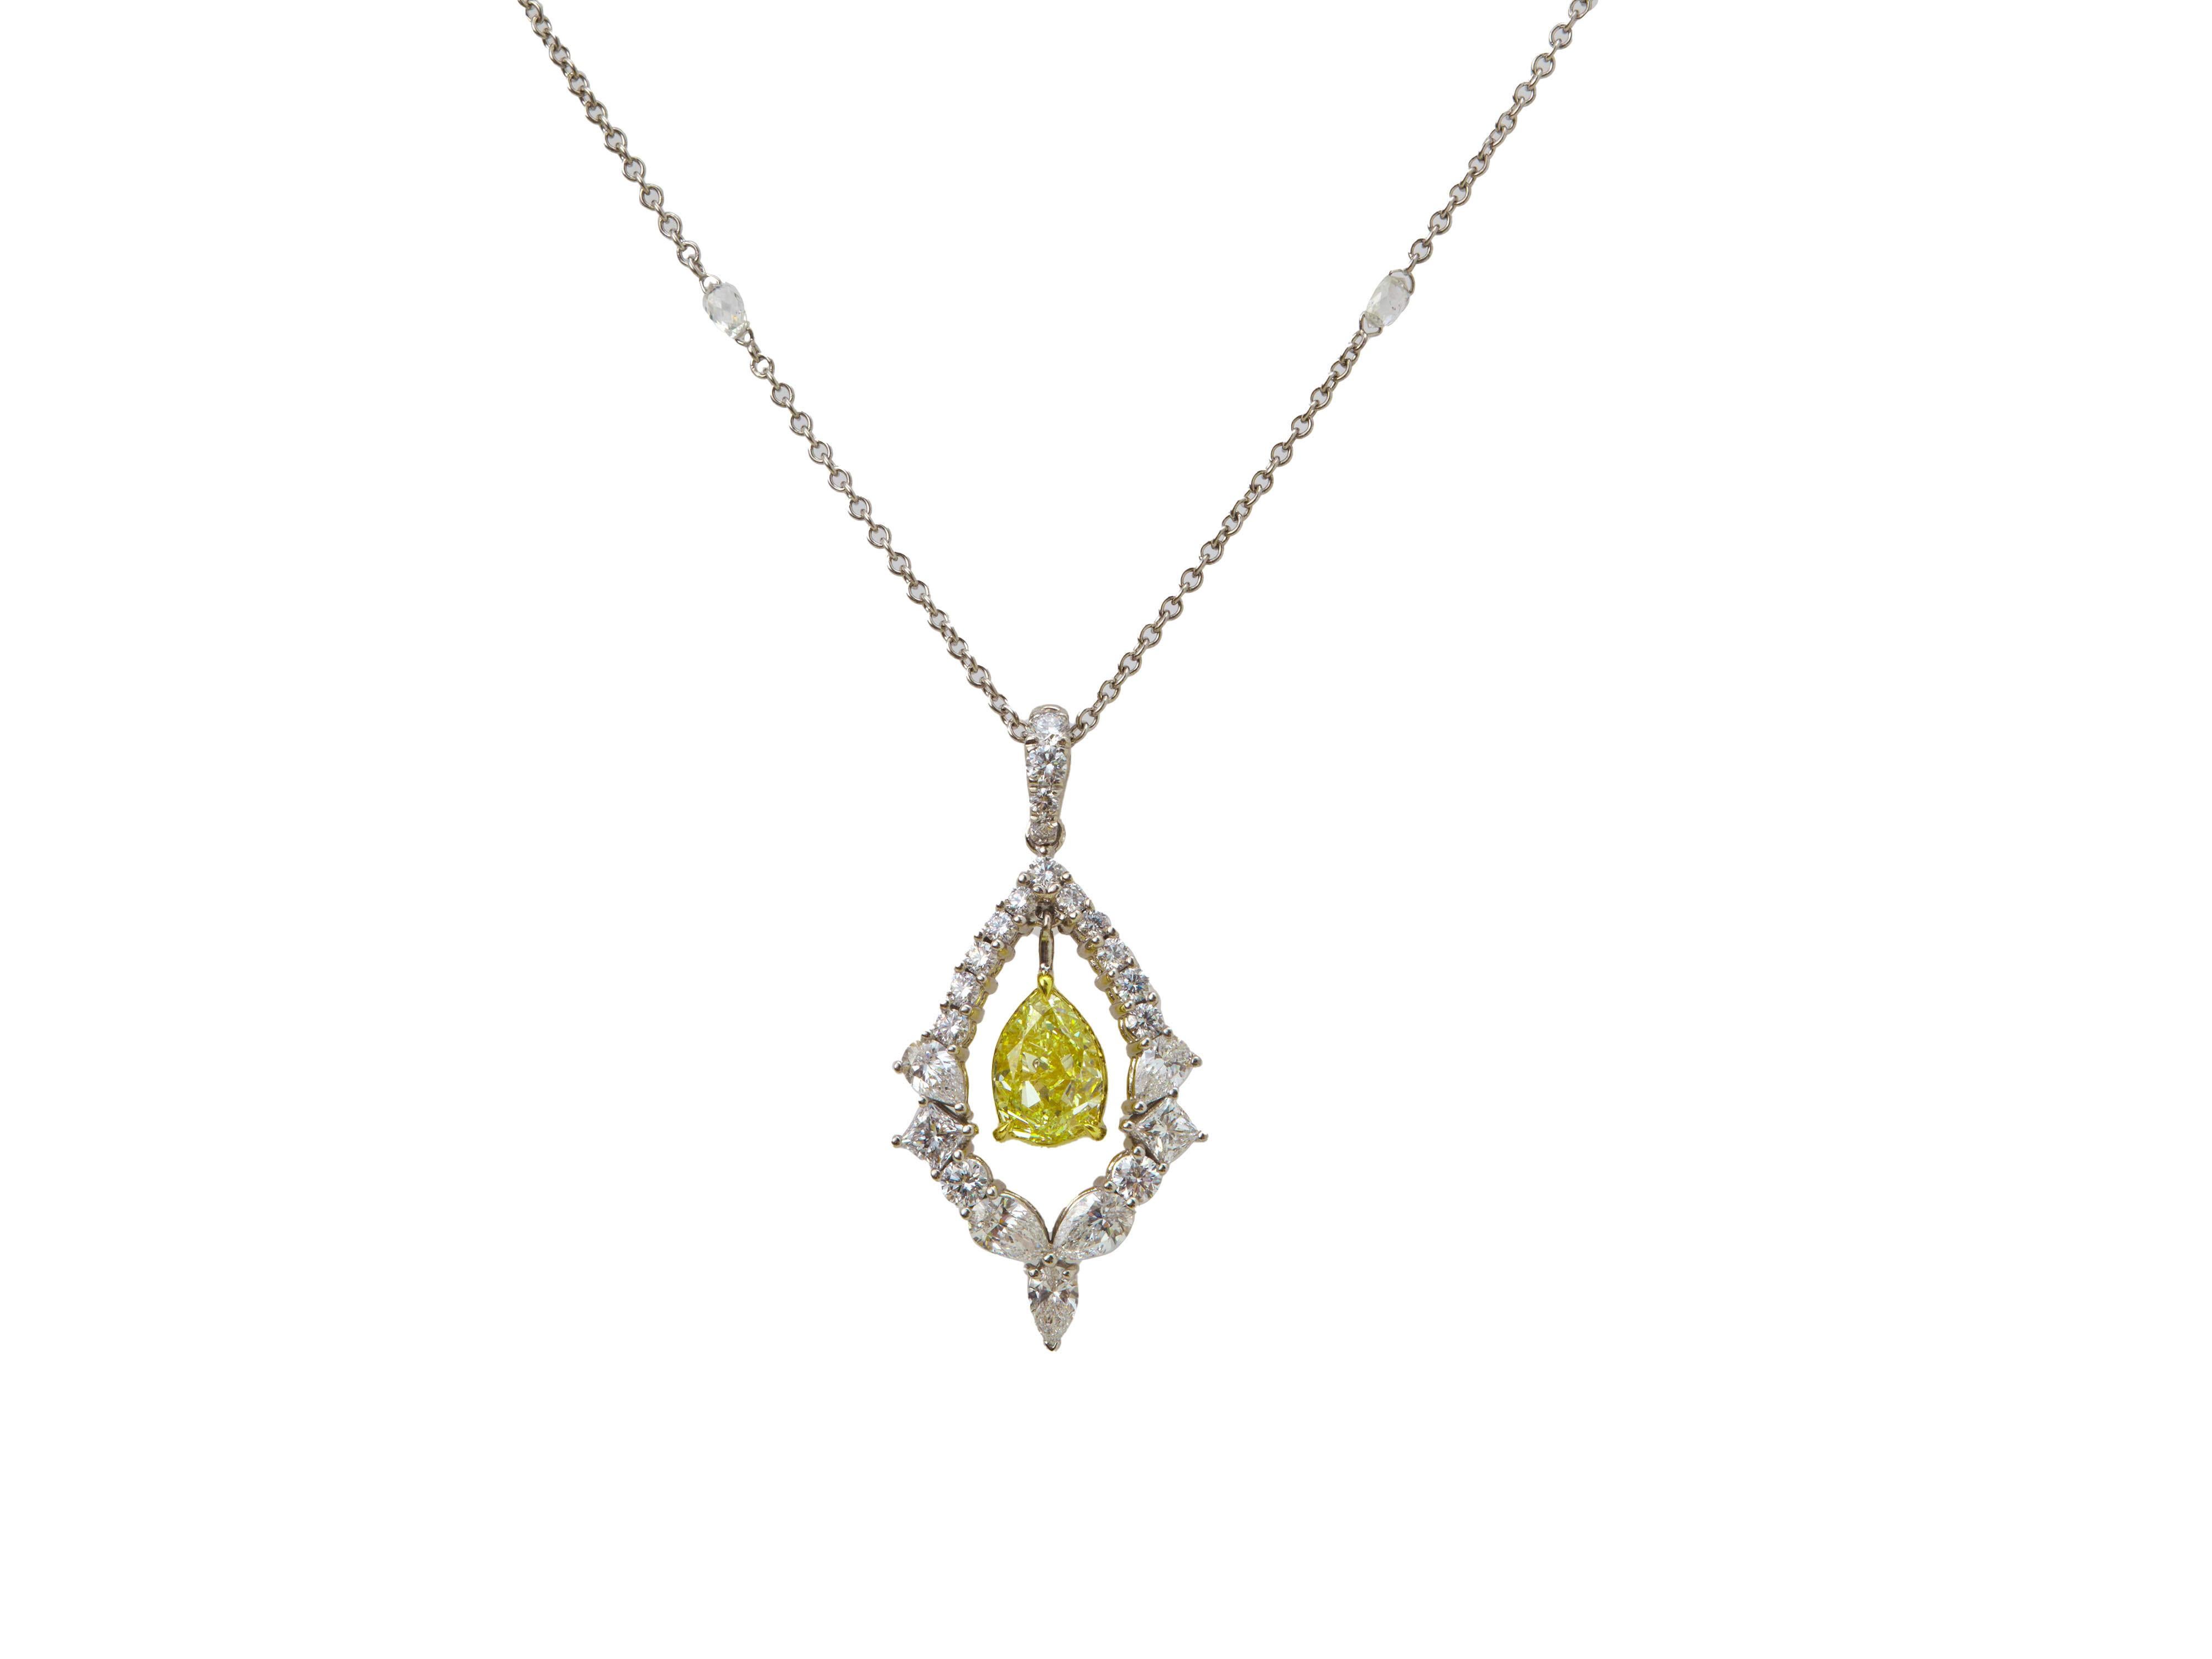 Pear Cut 6.93 Carat Fancy Yellow and White Diamond  Necklace 18K White Gold GIA Certified For Sale